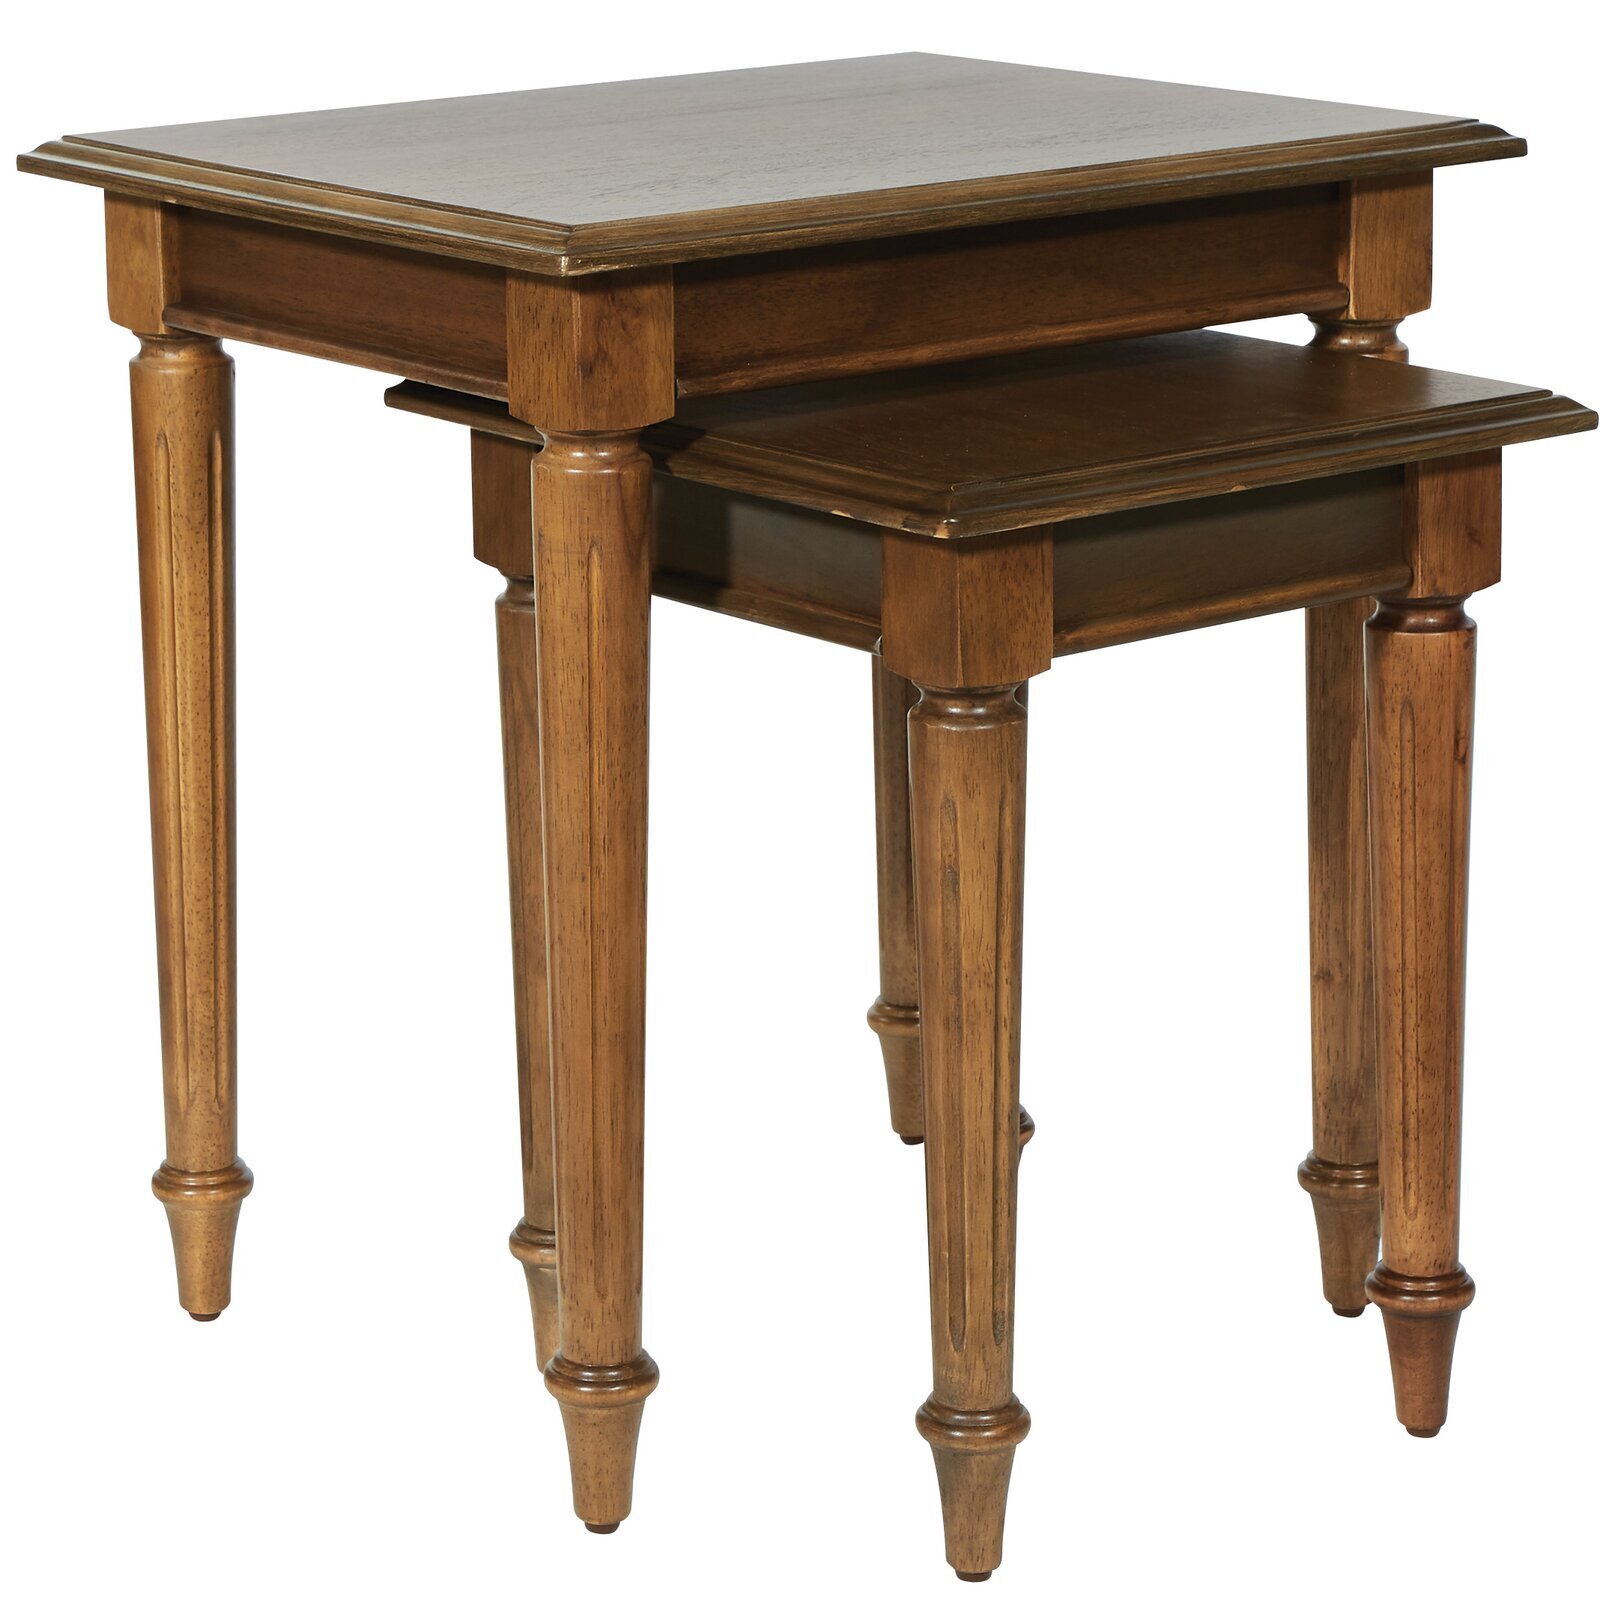 Distressed Antique Stacking Tables